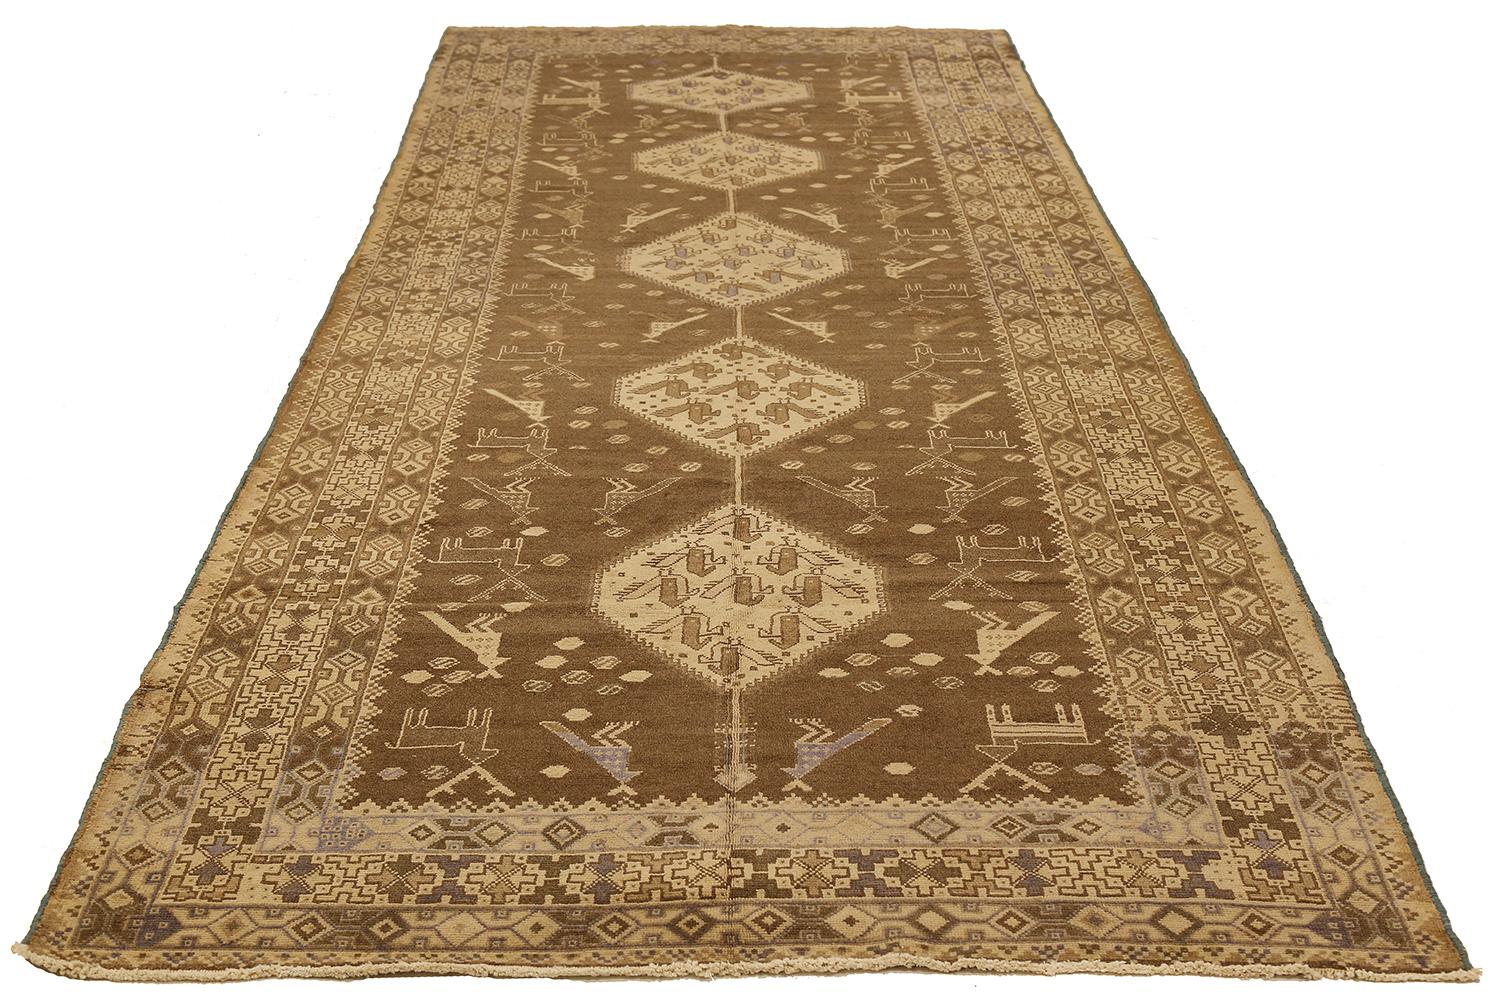 Antique Persian runner rug handwoven from the finest sheep’s wool and colored with all-natural vegetable dyes that are safe for humans and pets. It’s a traditional Malayer design featuring ivory and brown tribal details. It’s a lovely piece to